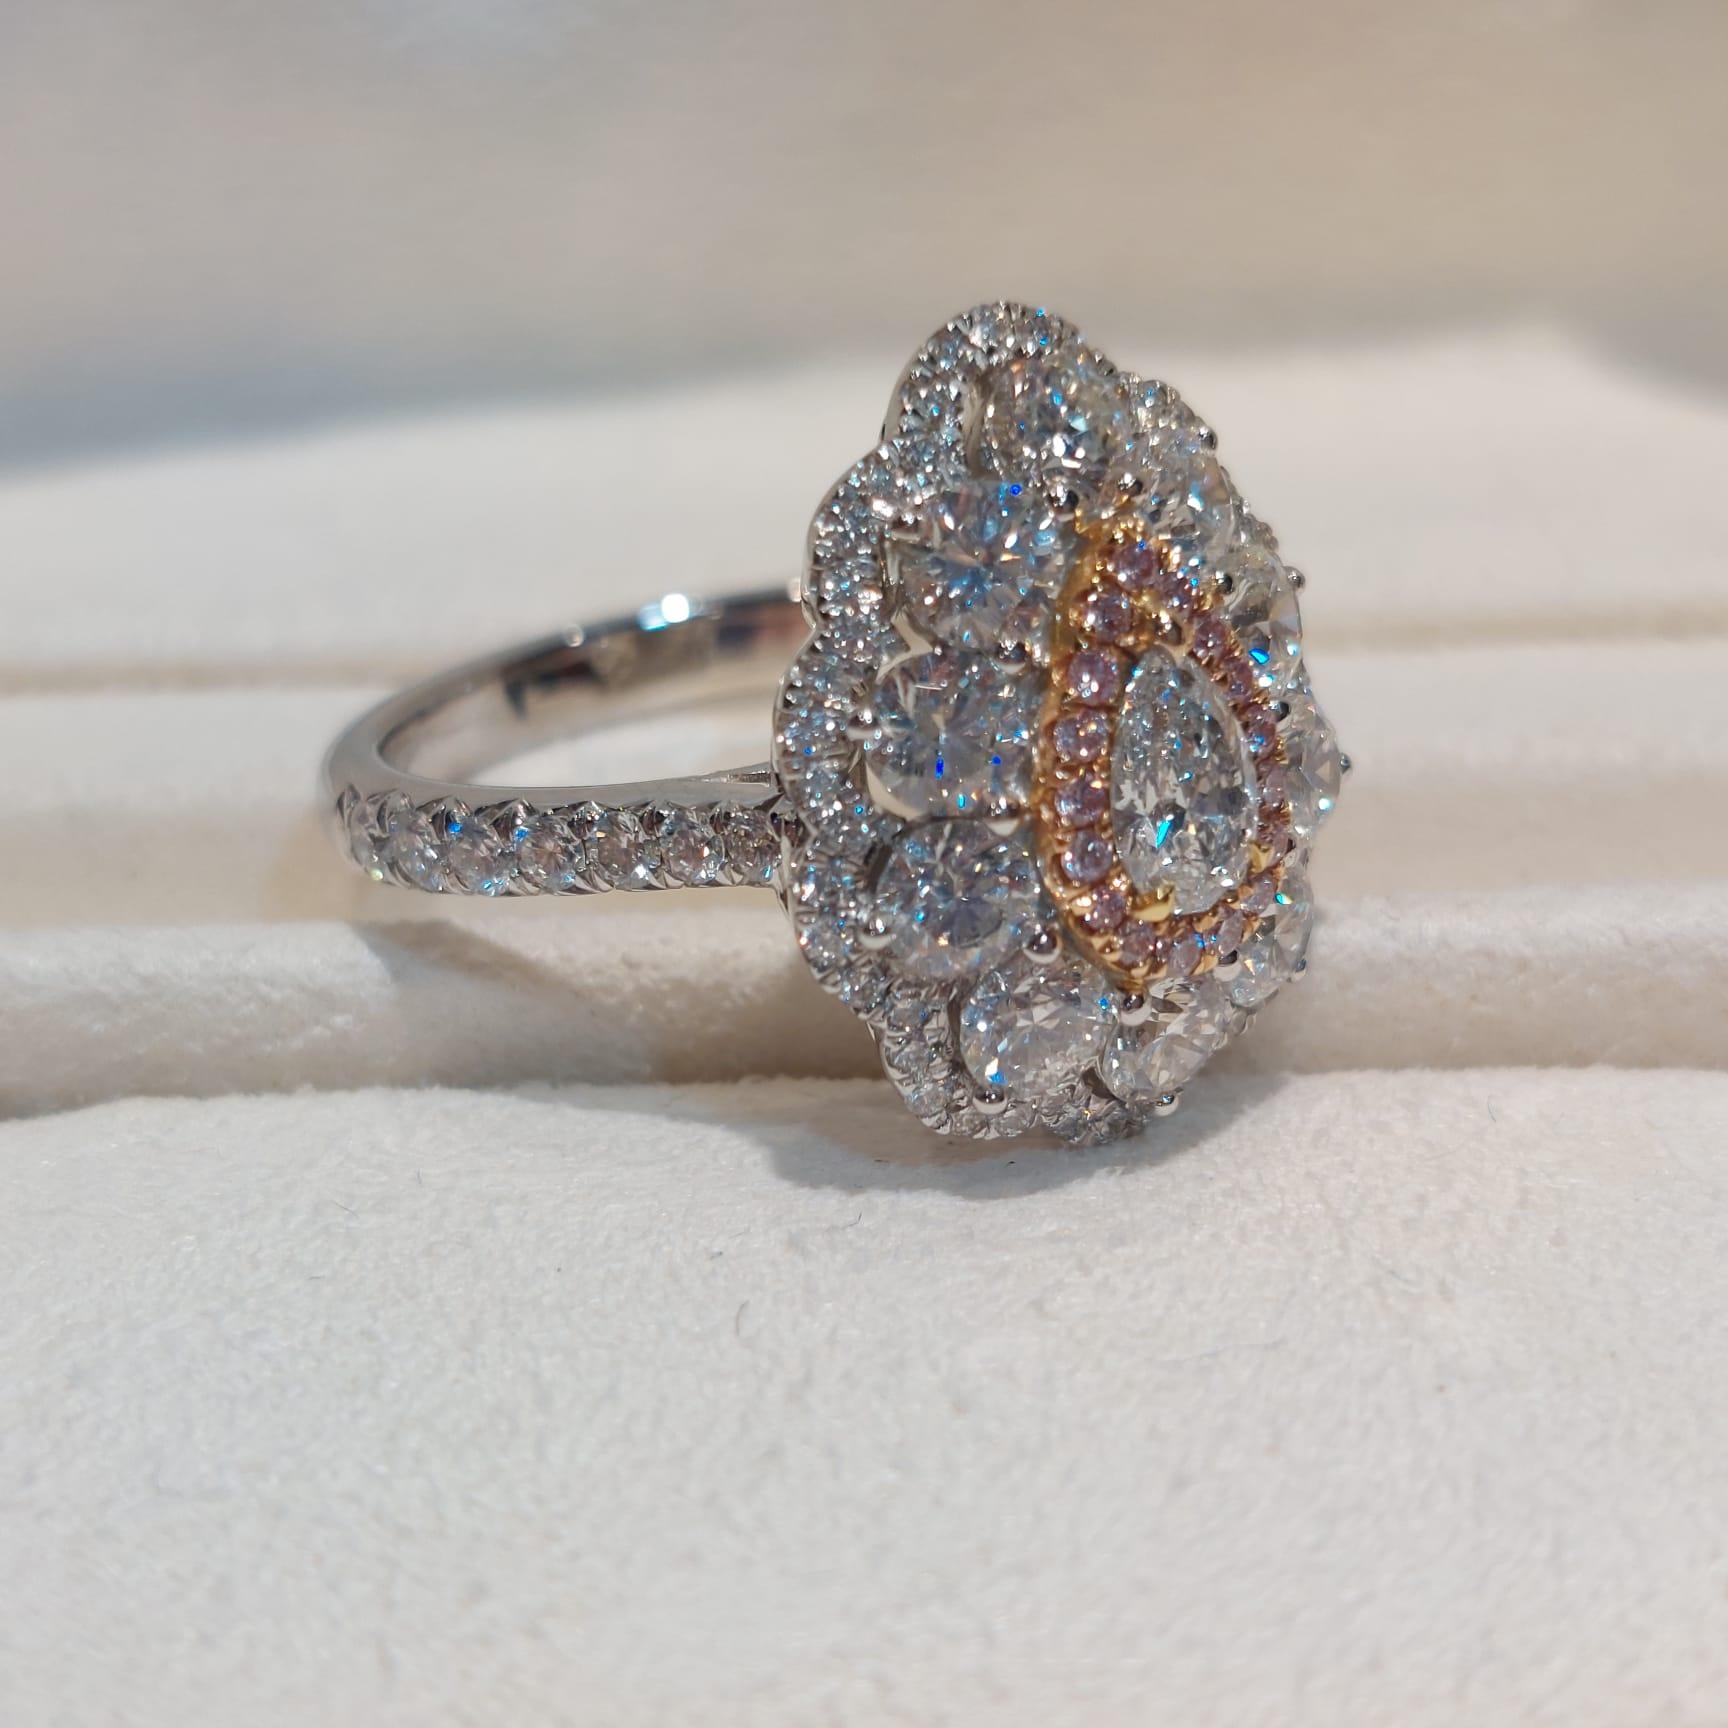 Diamonds symbolize love and beauty, pink diamonds are associated with femininity and romance, often used as symbols of tenderness or sweetness, and pink diamonds are also said to represent gracefulness and elegance.

This gorgeous ring setting in